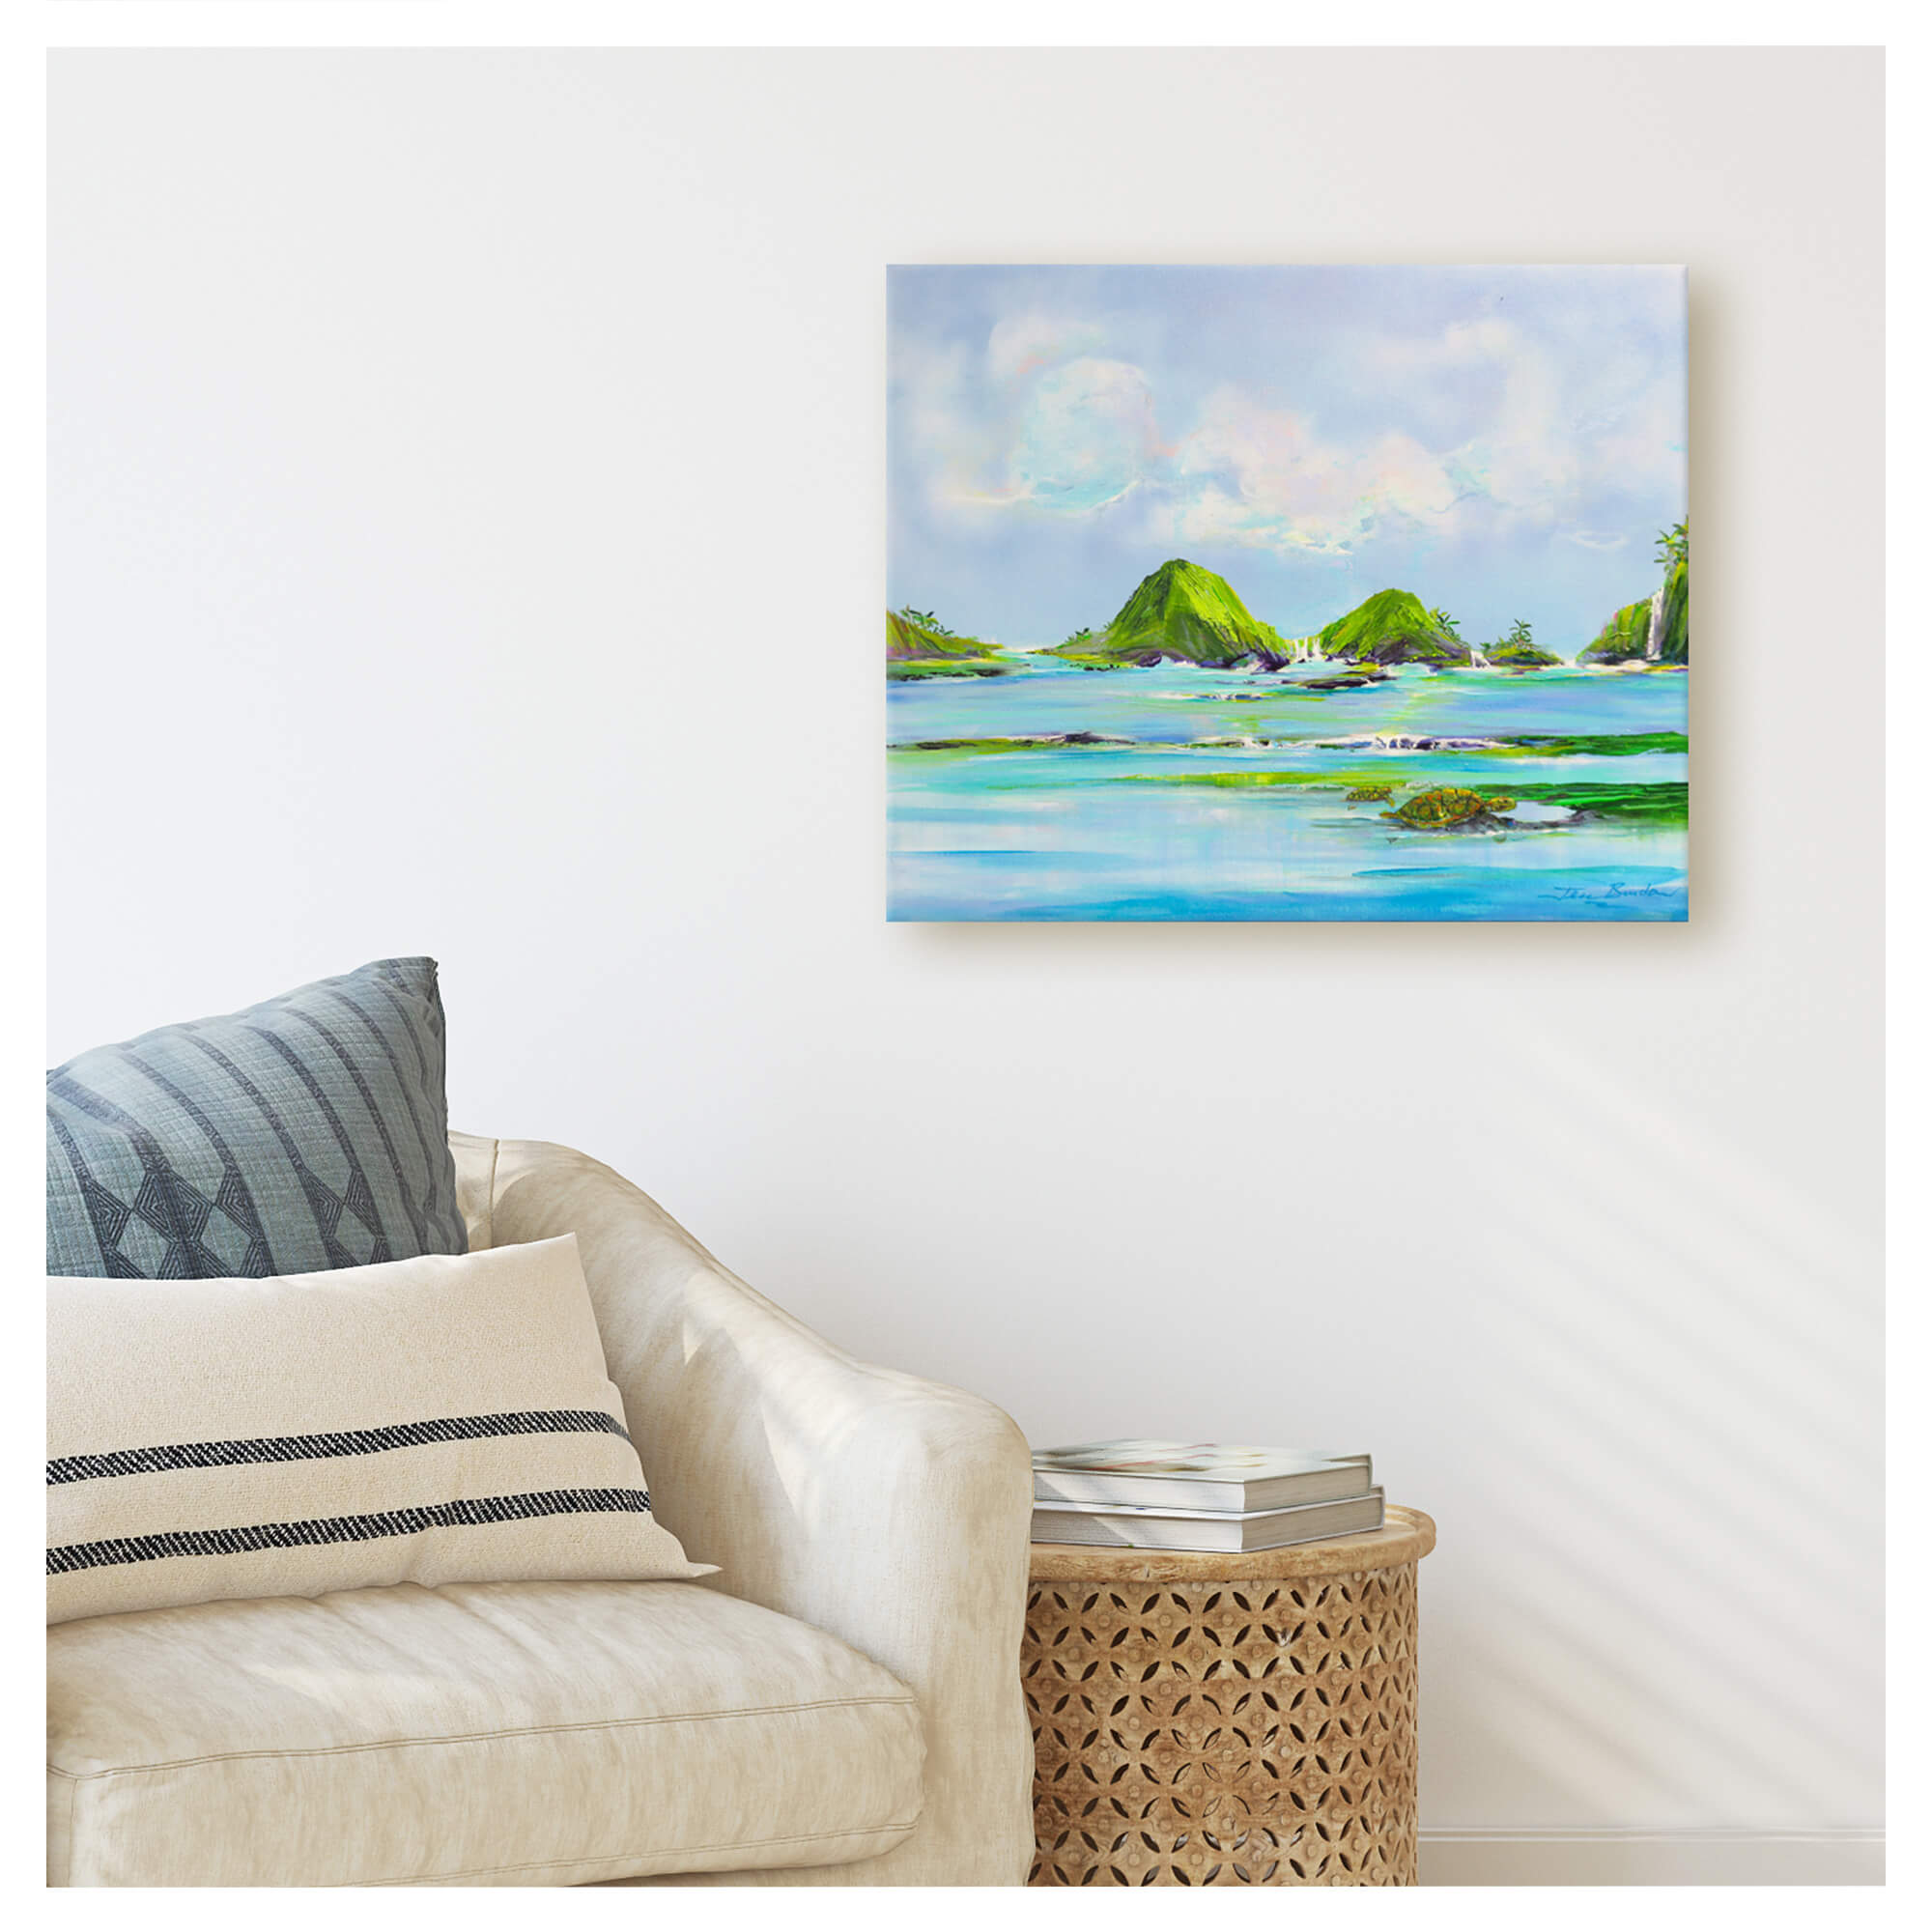 A seascape with teal-hued water and sea turtles by Hawaii artist Jess Burda